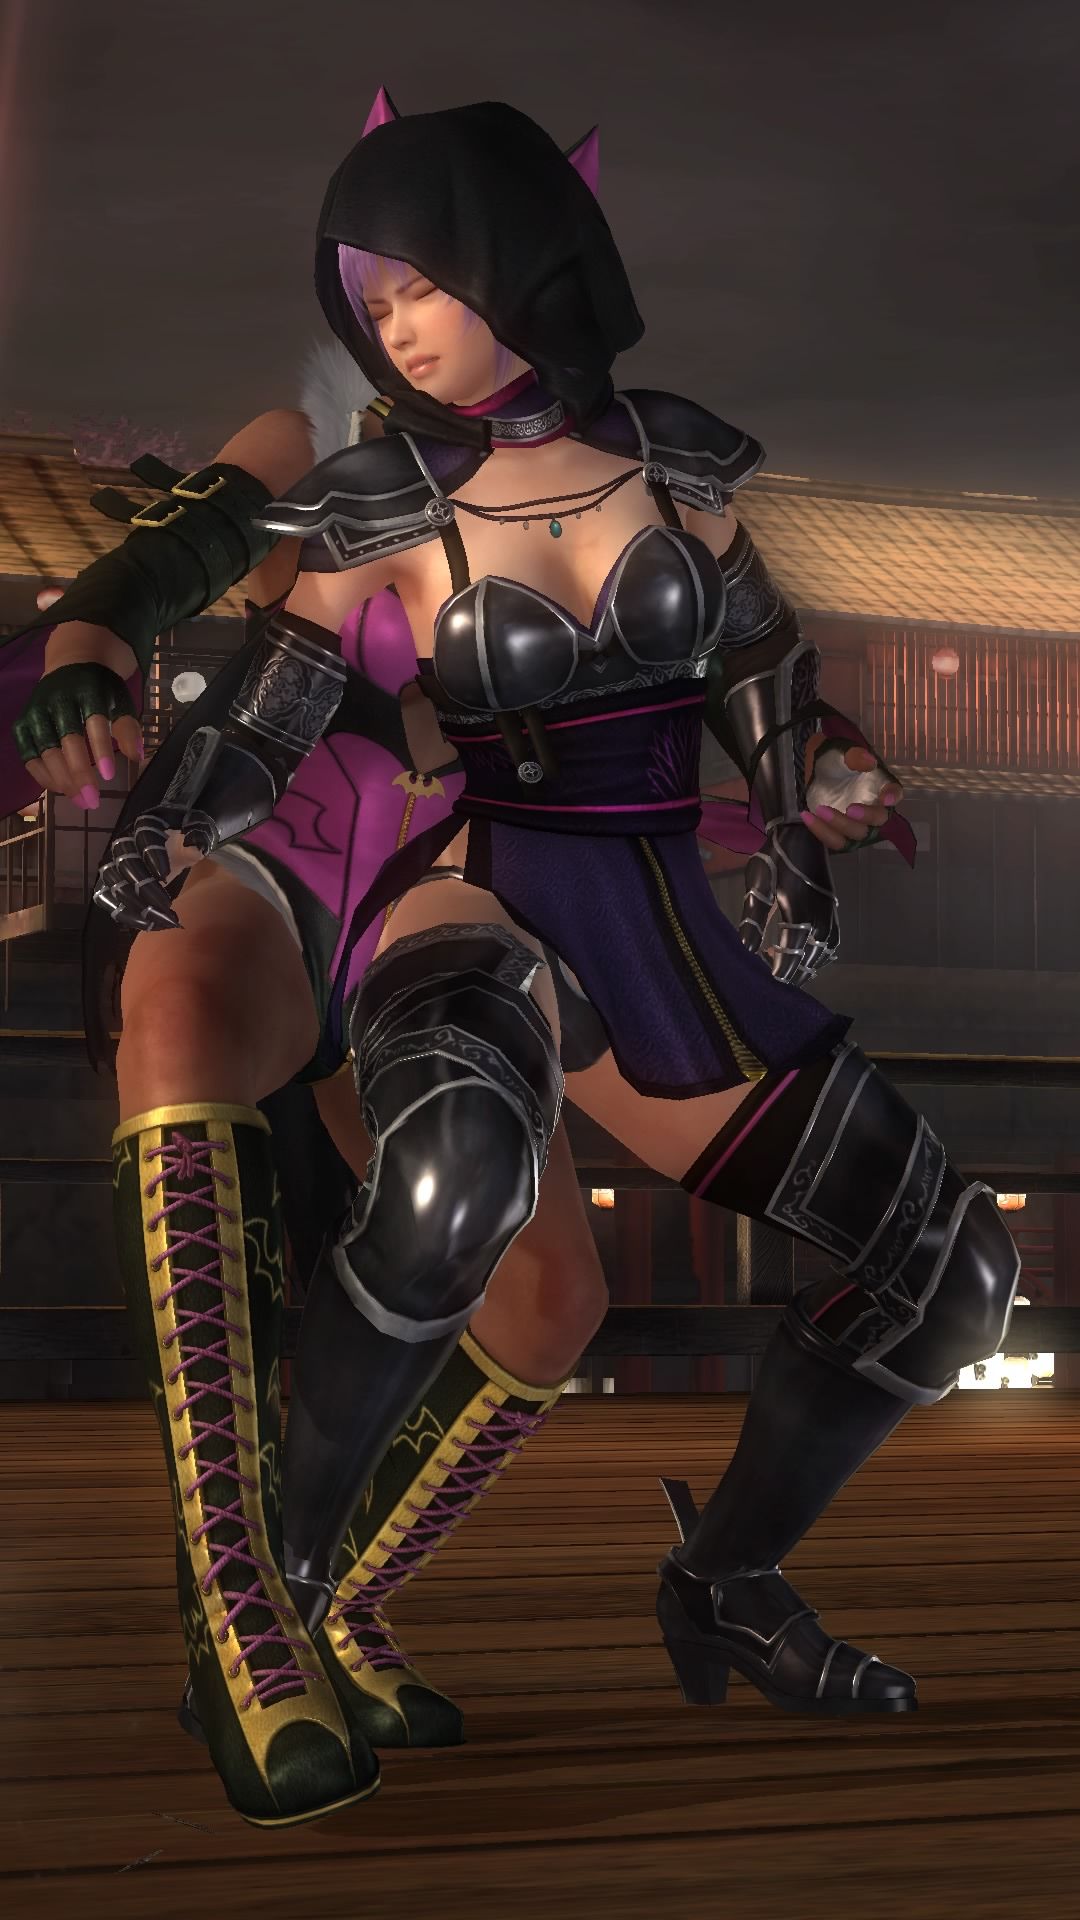 DOA5LR ayane (everyone's Halloween by 2015) to Hitomi and Lisa Tagme throwing at ryona 2